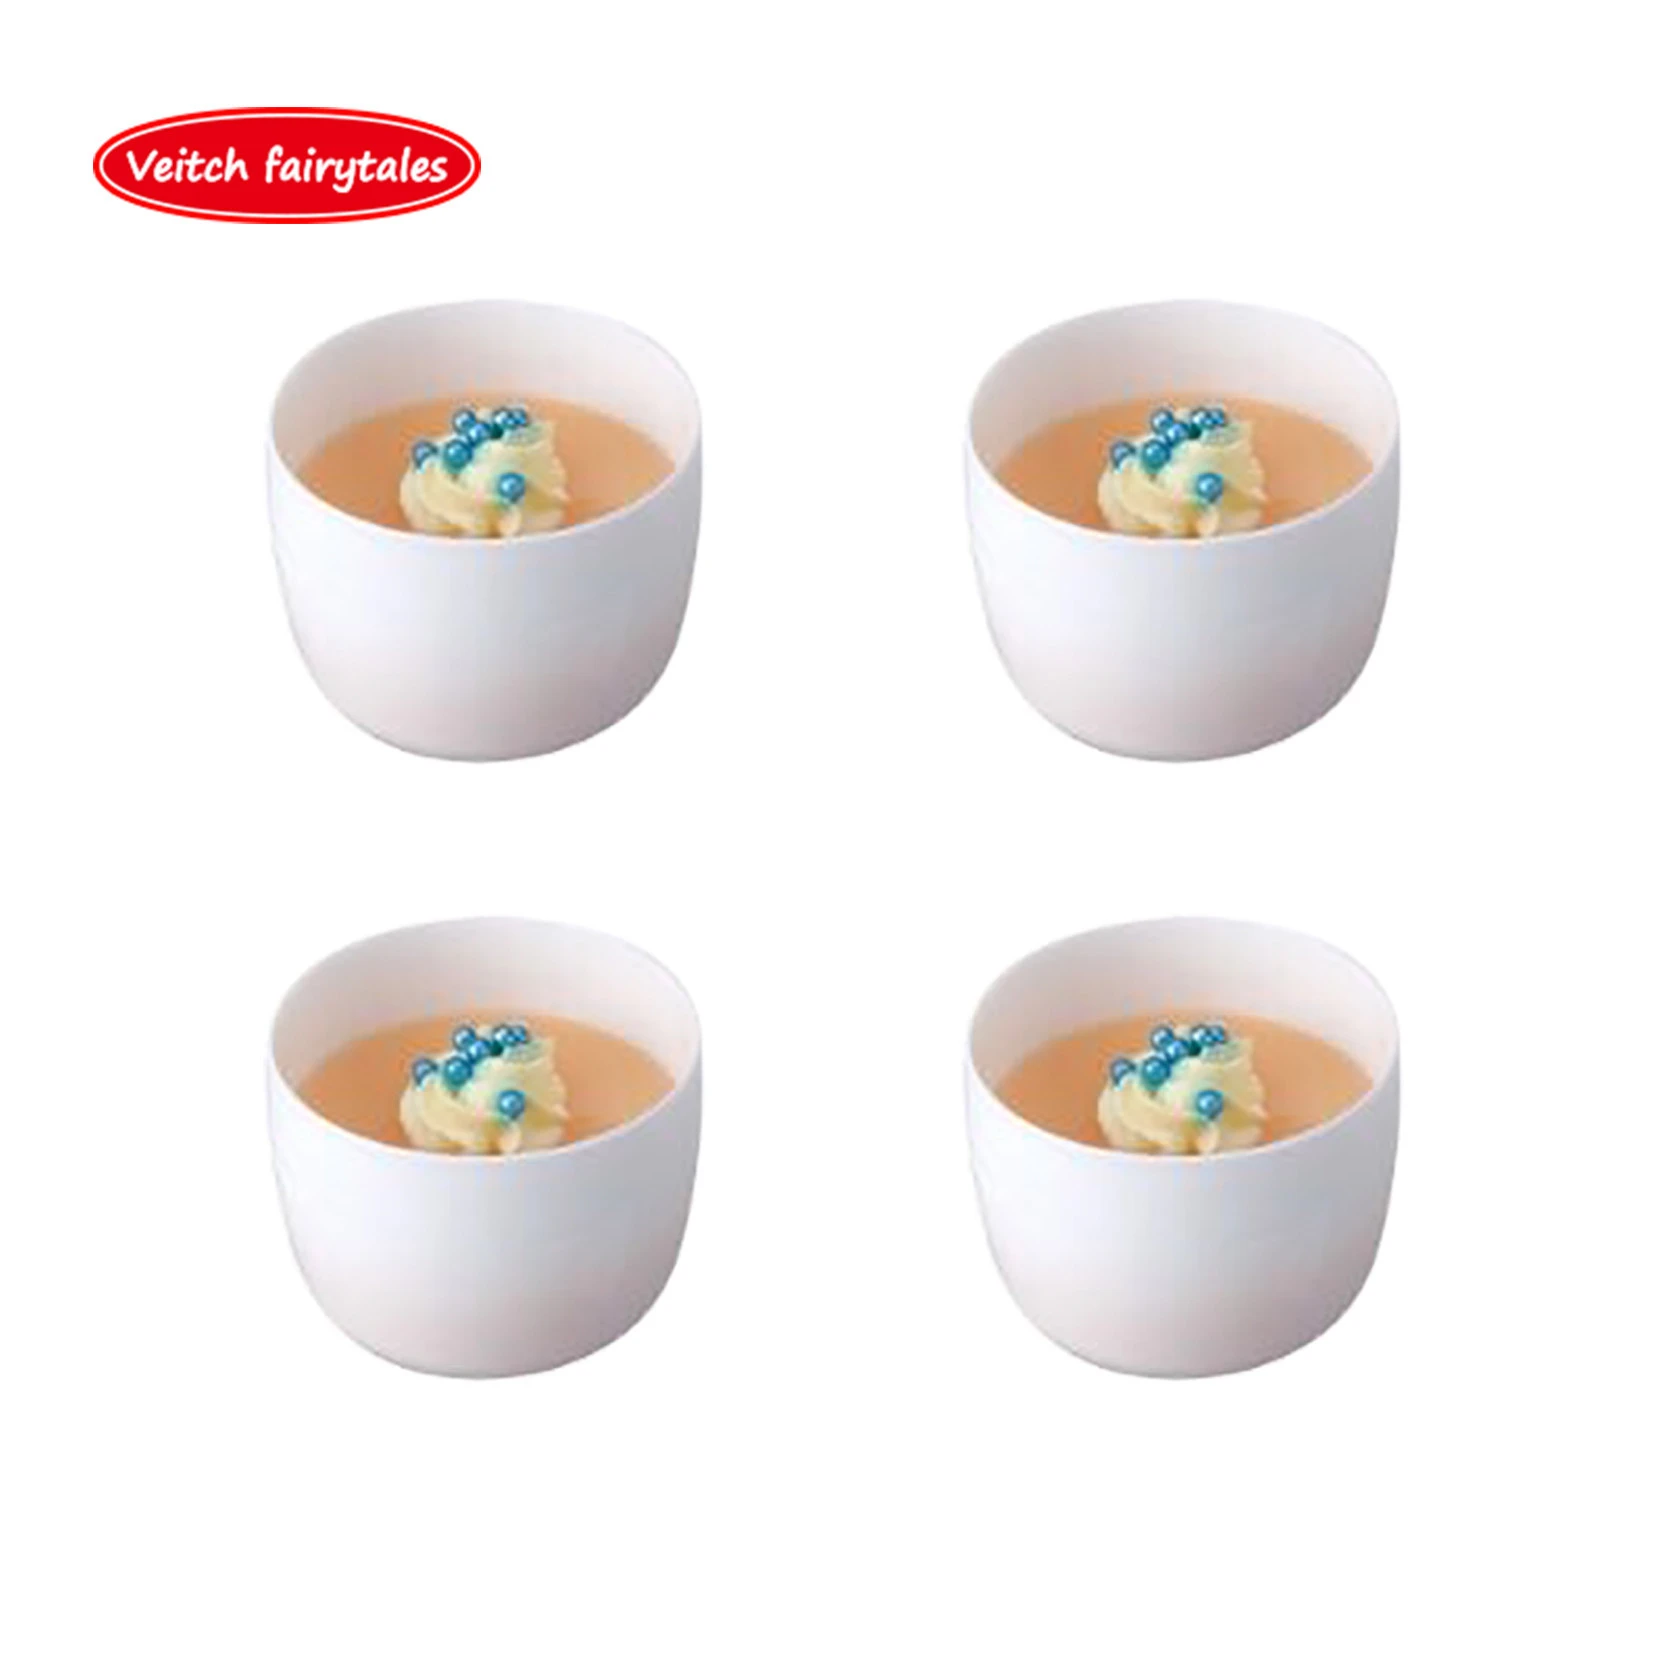 Veitch Fairytales Children Pretend Play Food Cooking Game White Plastic Cup Kitchen Toy Accessories